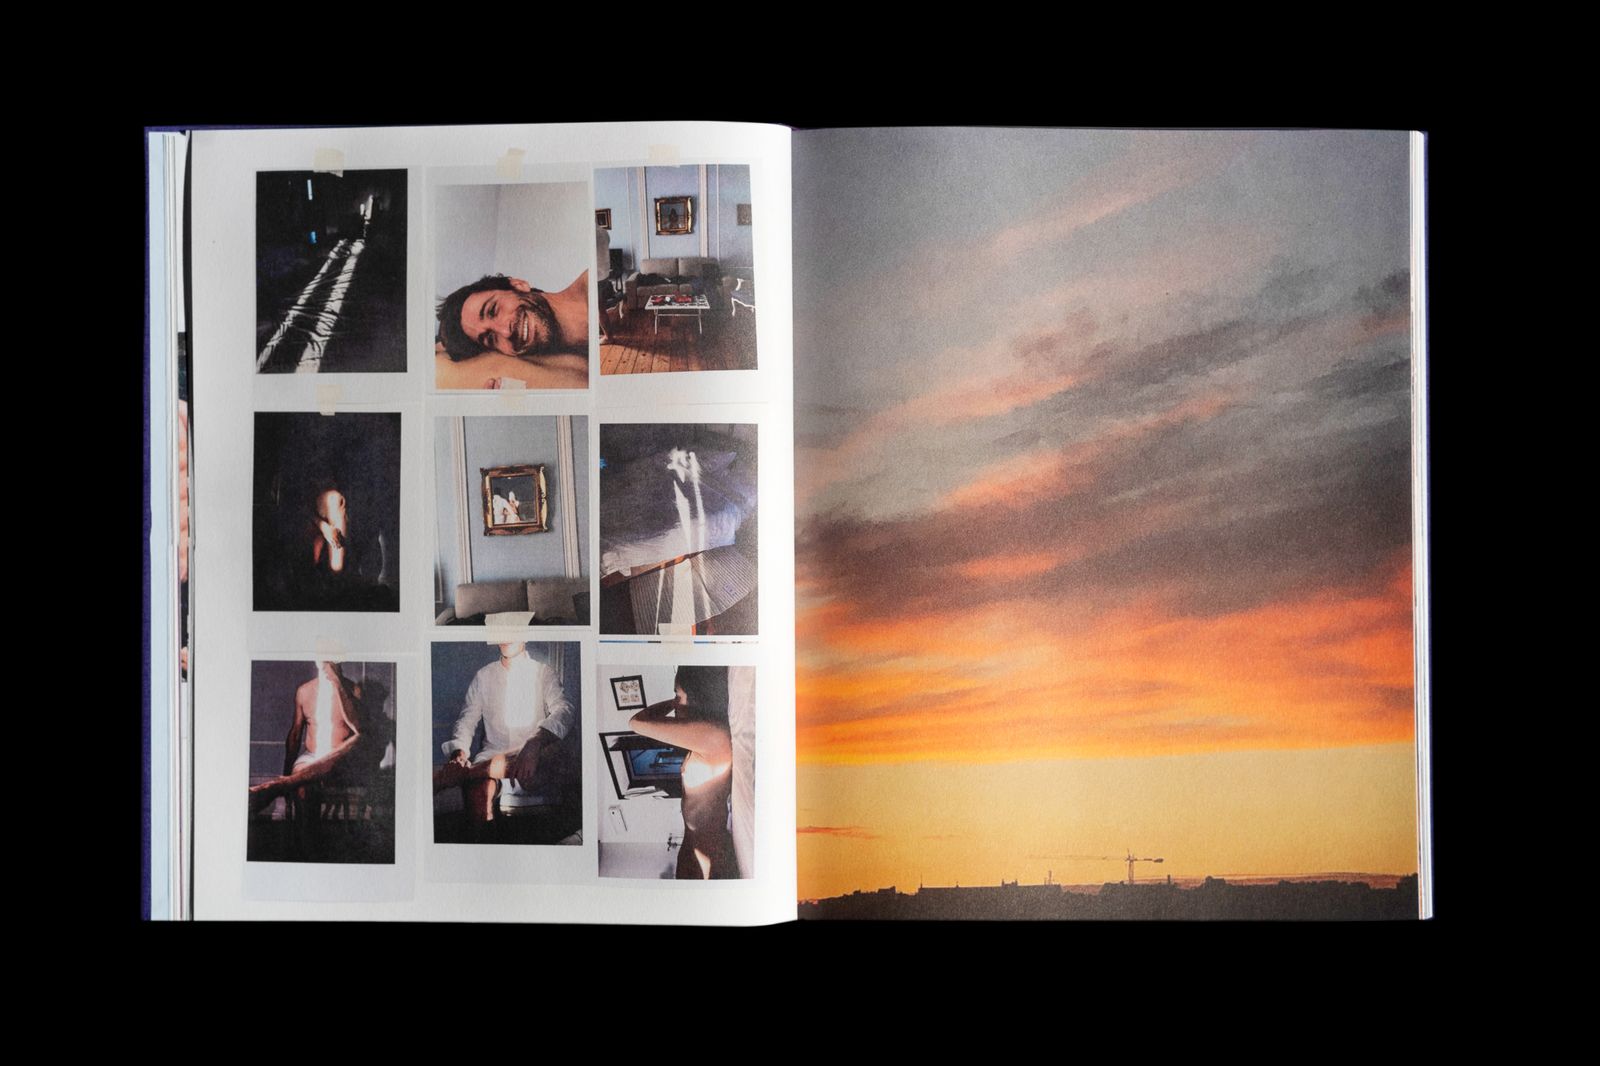 Photobook Review: Another Love Story by Karla Hiraldo Voleau